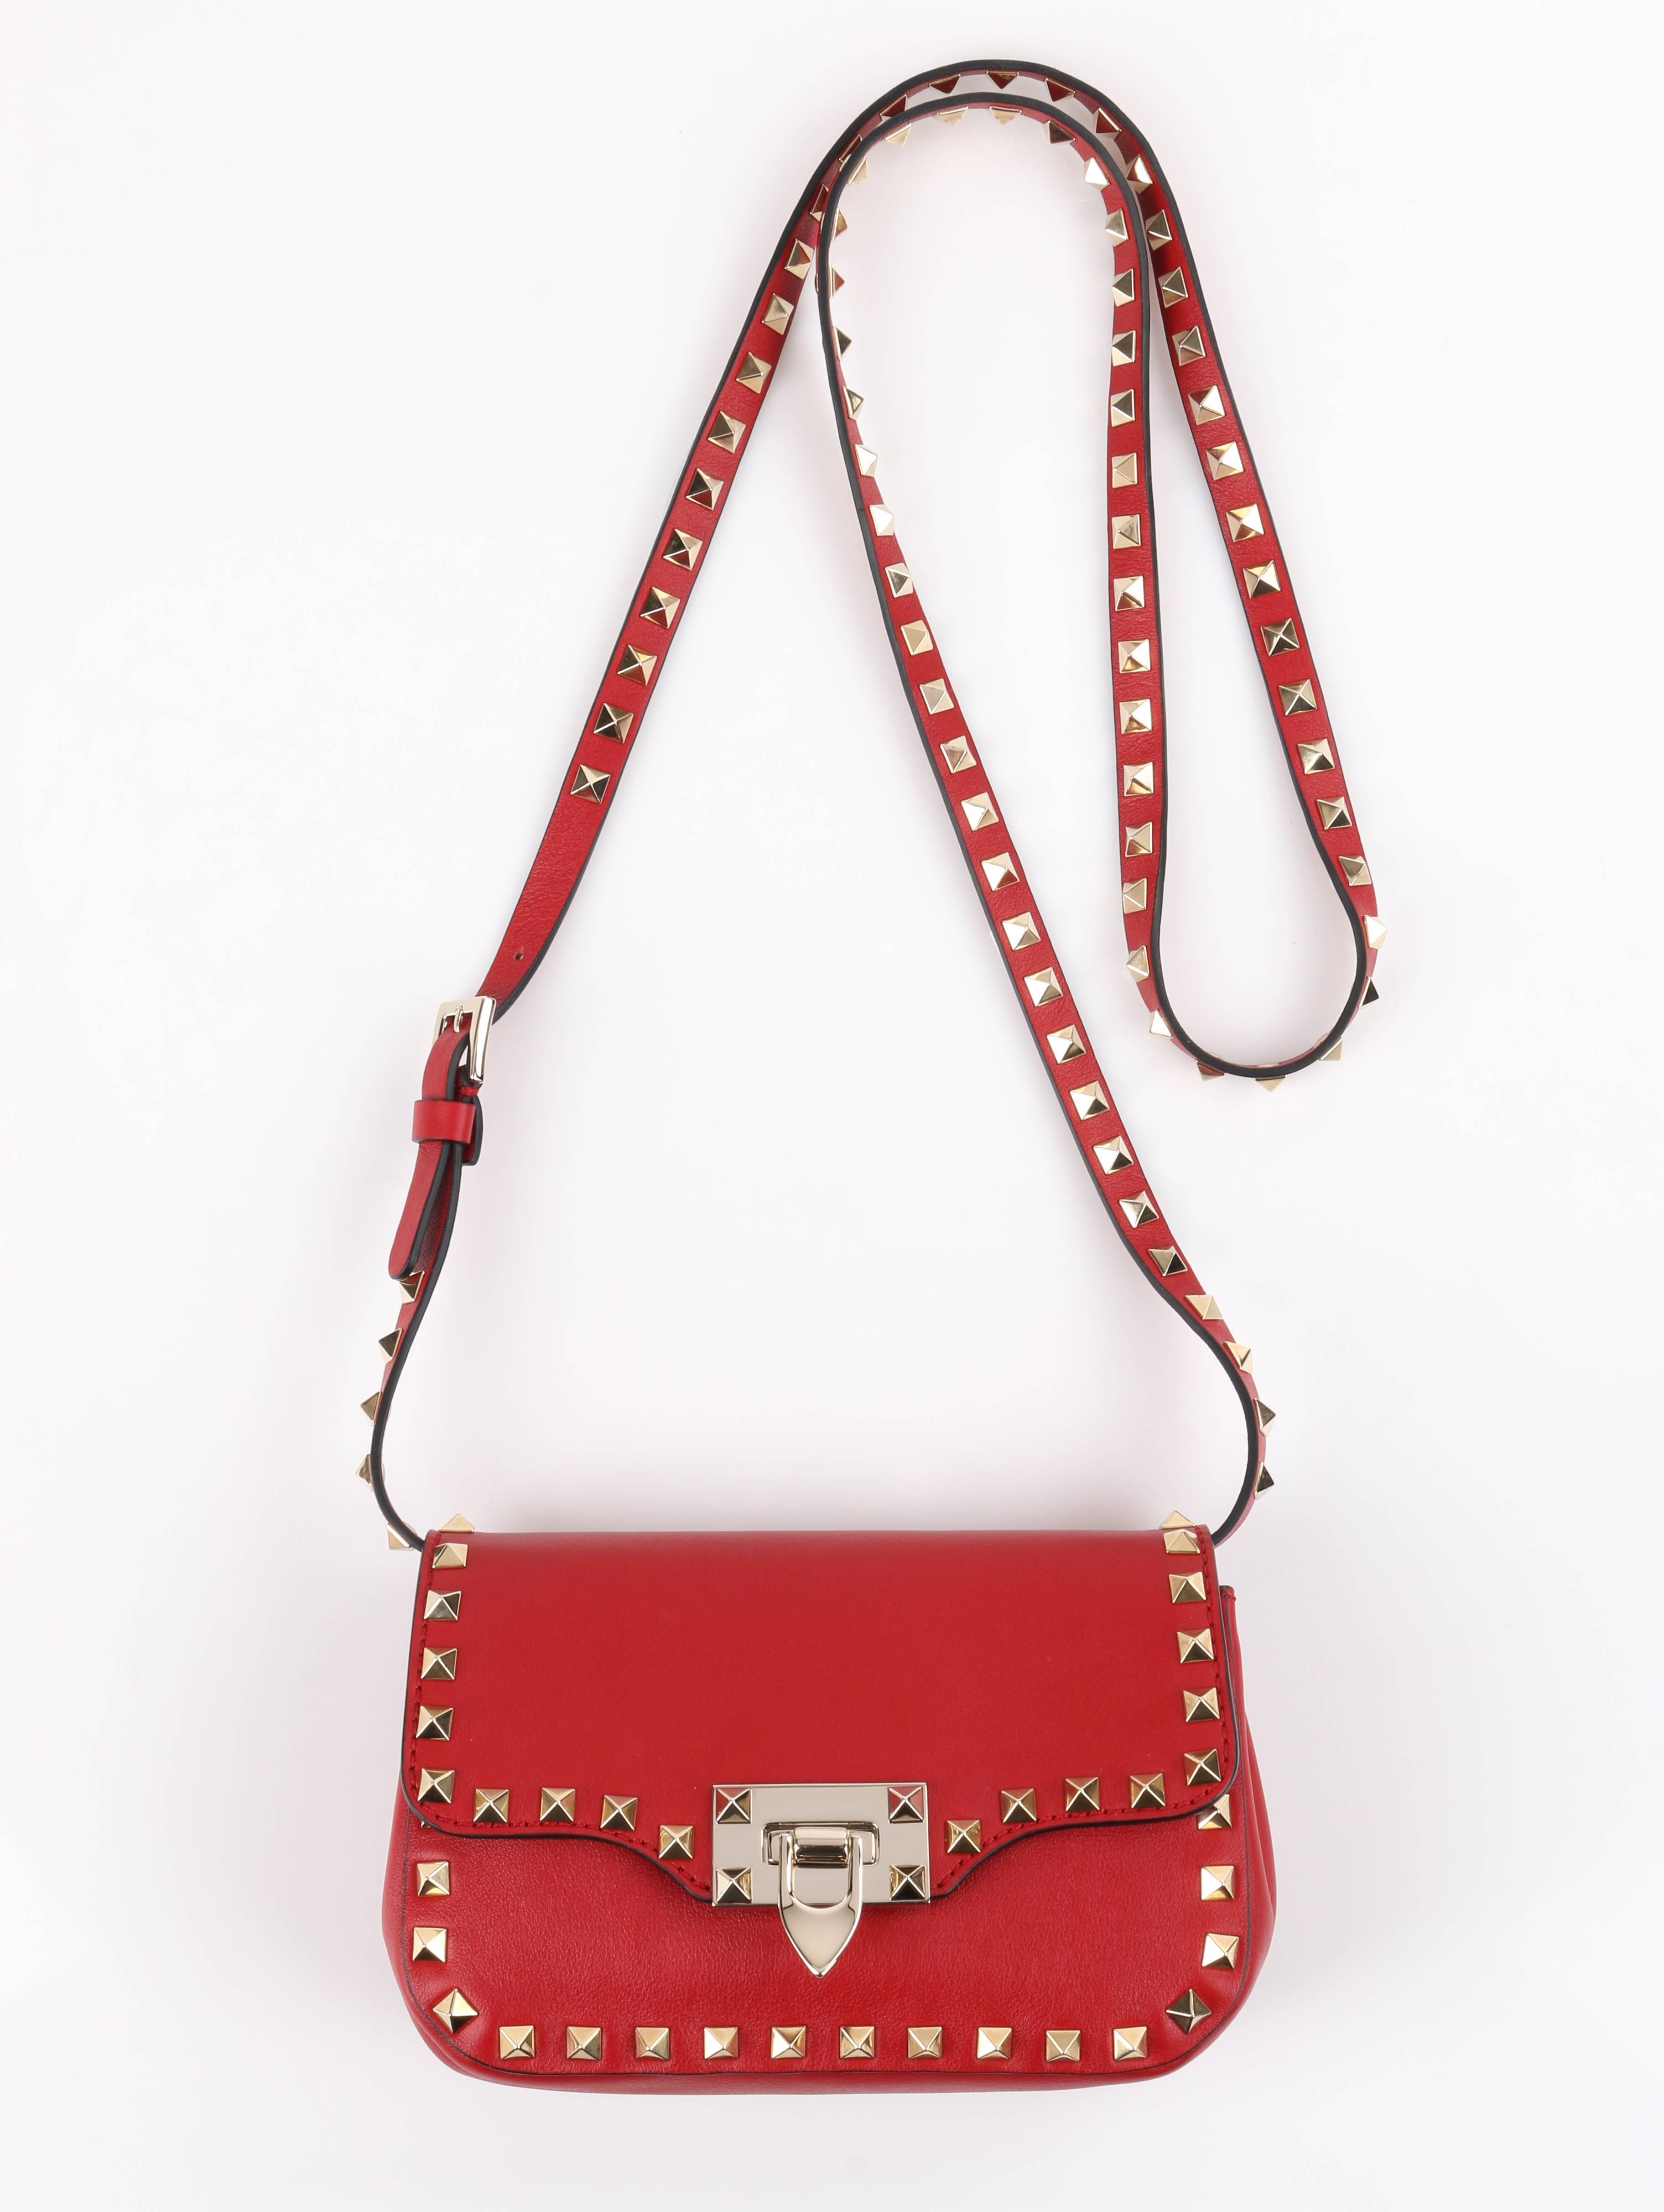 Valentino Garavani red vitello (calf) leather and gold pyramid stud "Mini Rockstud" cross-body purse. Flap top with gold-toned flip-lock closure. Gusseted sides. Long adjustable and detachable thin cross-body strap with gold-toned buckle